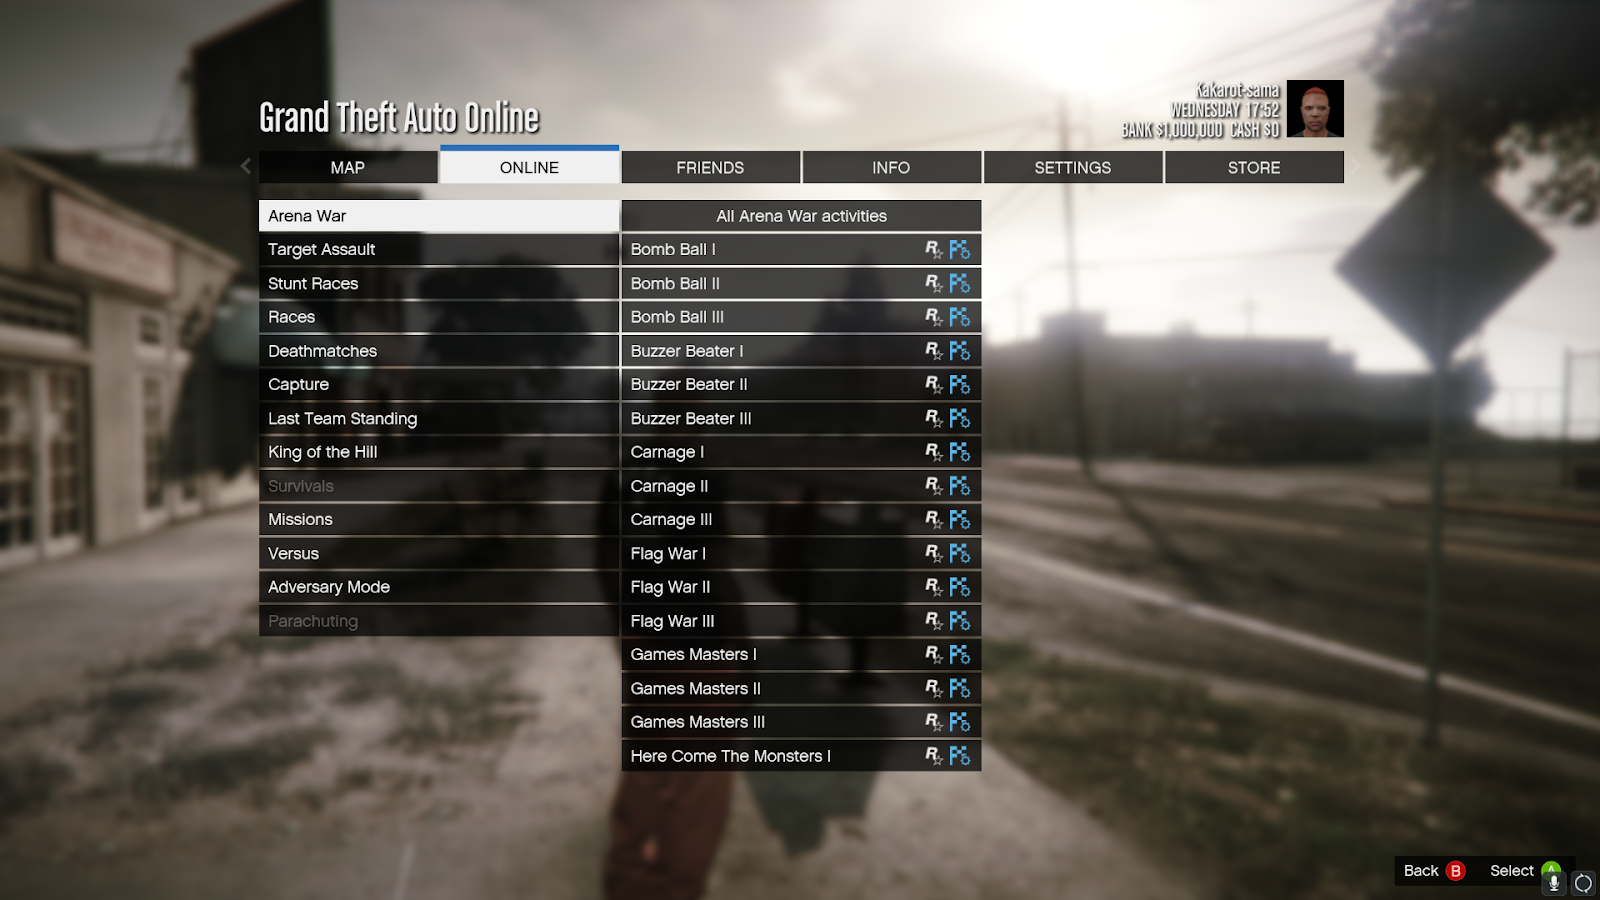 A list of jobs you can undertake to make money fast in GTA Online. Image captured by VideoGamer.